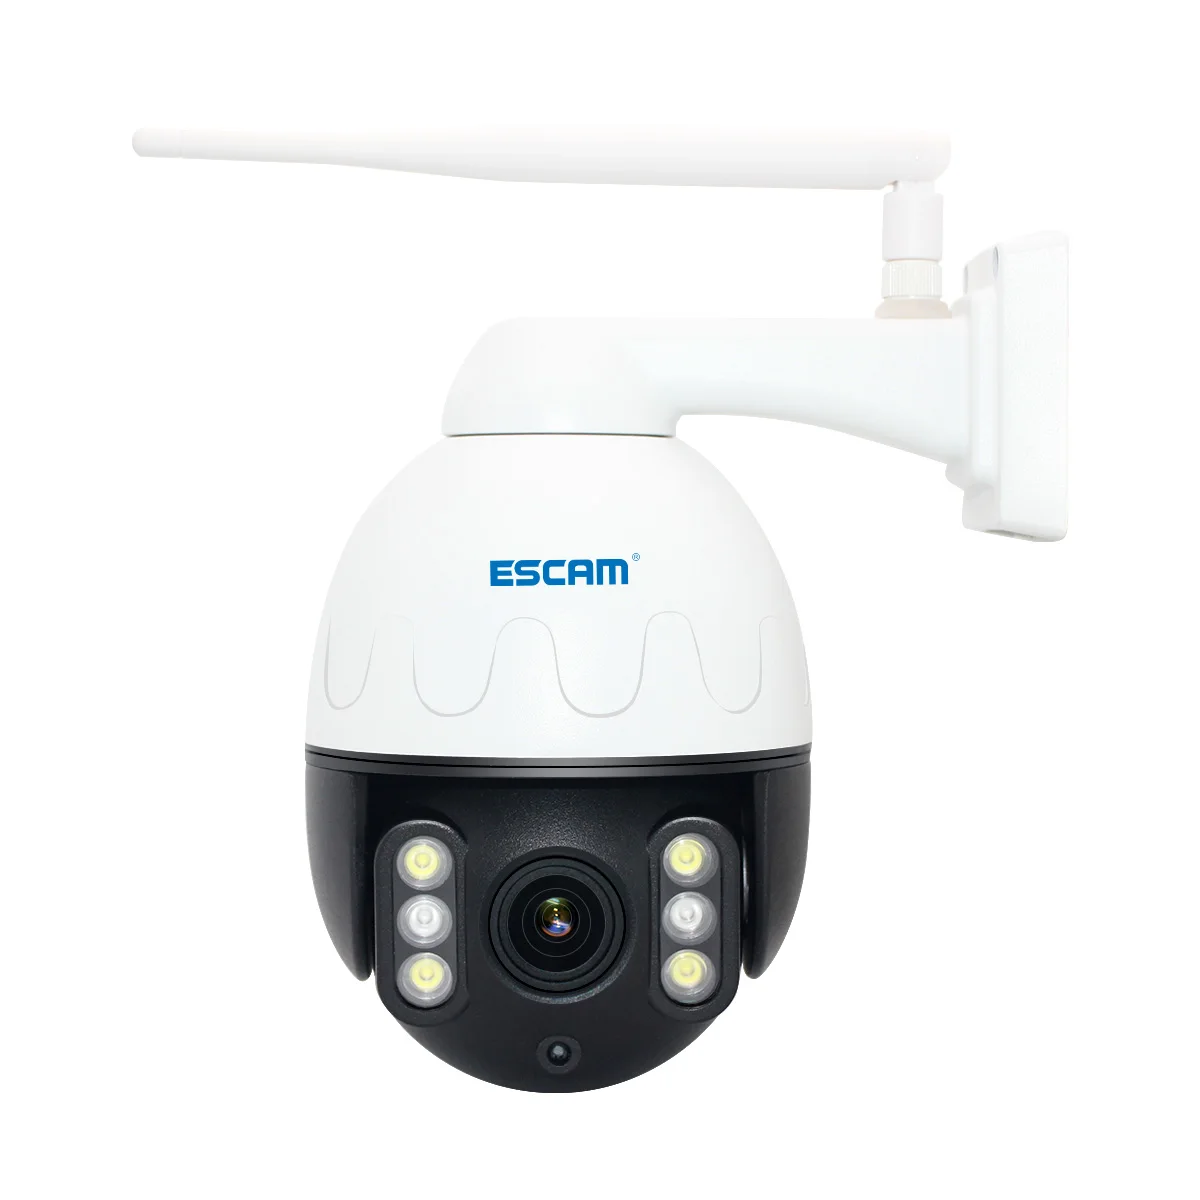 

ESCAM Q5068 H.265 5MP Pan/Tilt/4X Zoom WiFi Waterproof IP Camera Support ONVIF Two Way Talk Night Vision with metal shell